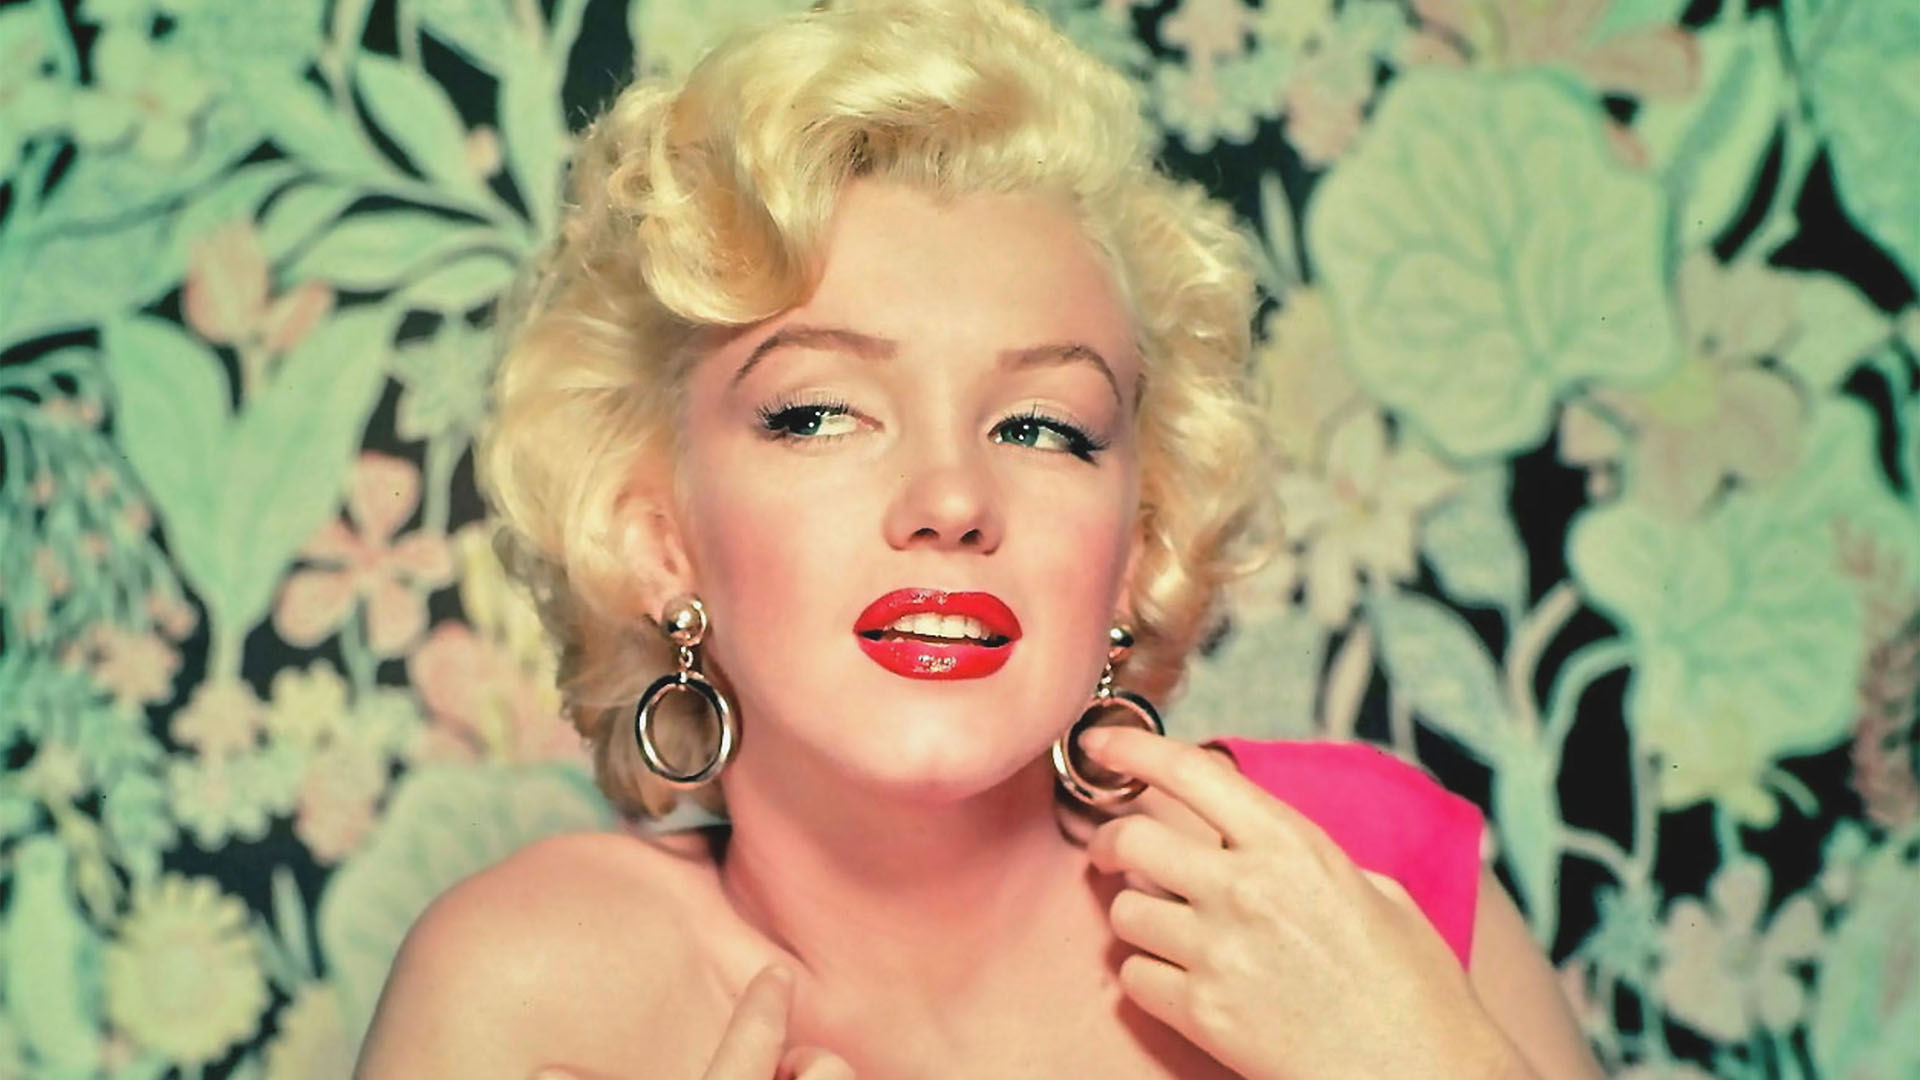 60 Years Later and Marilyn Monroe's Style is Still Rocking the World